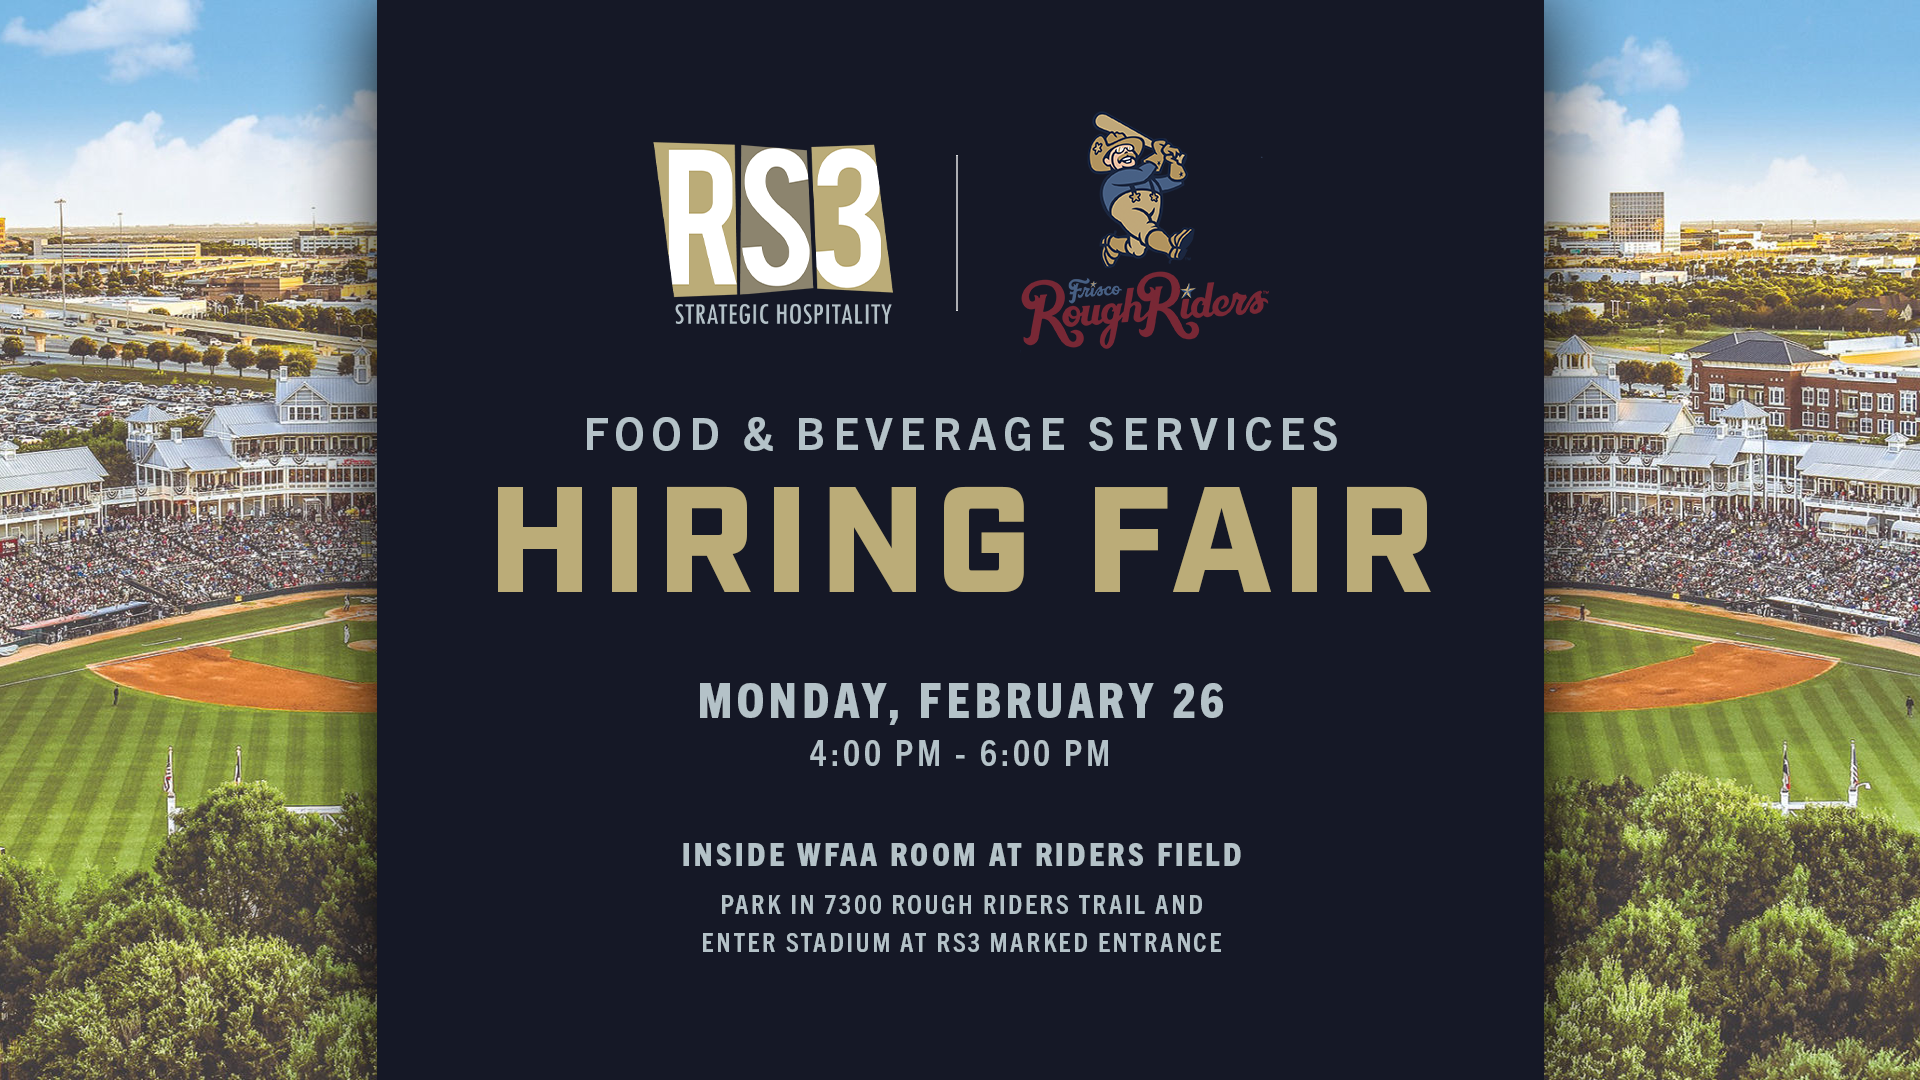 RS3 Strategic Hospitality to Host Hiring Fair at Riders Field